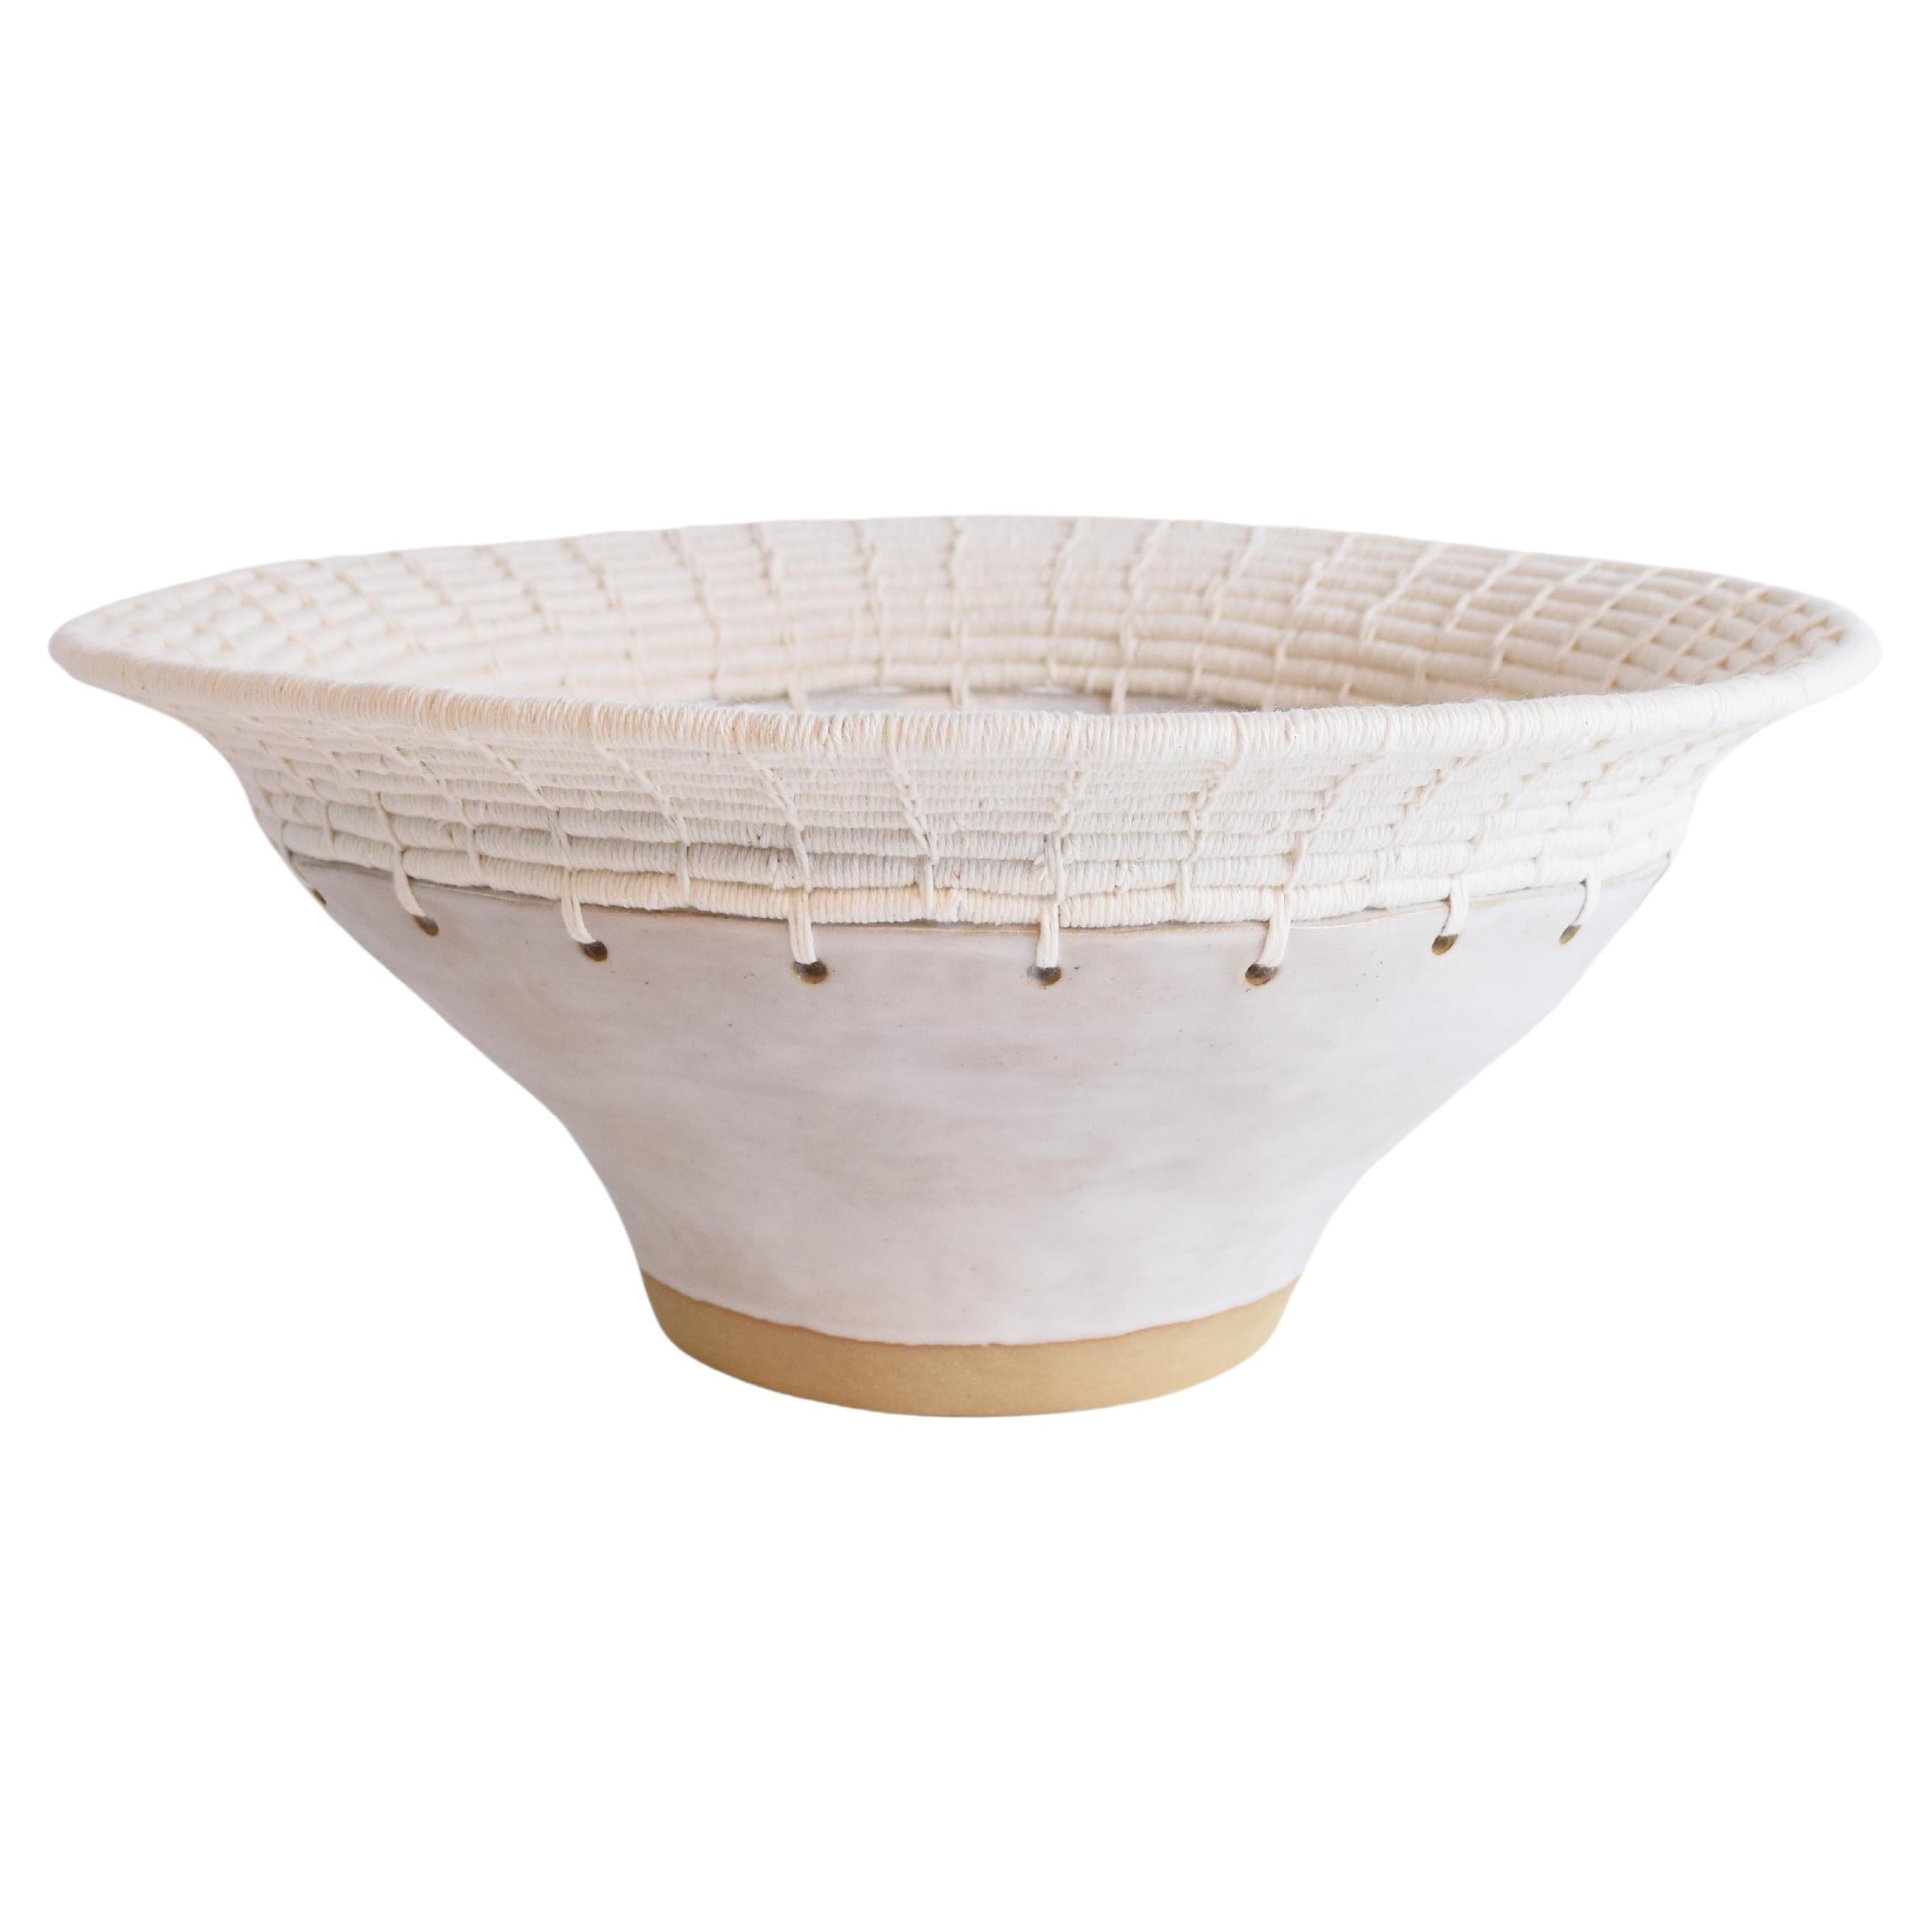 One of a Kind Handmade Ceramic Bowl #807, White Glaze & Woven Cotton Upper For Sale